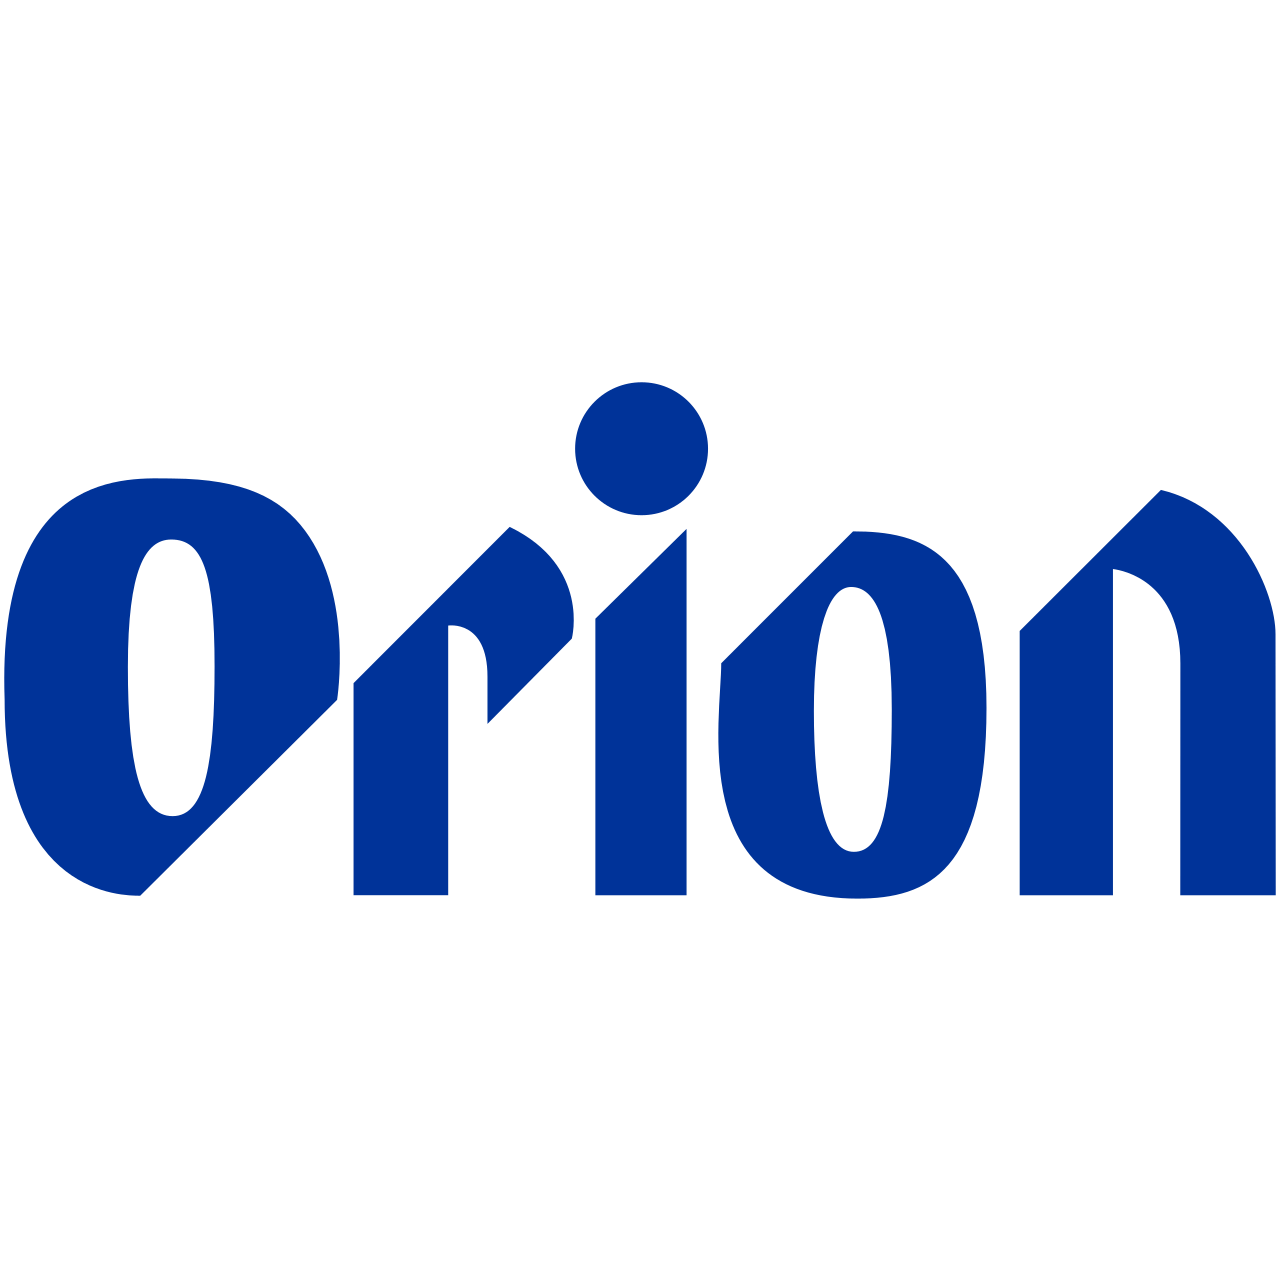 Orion Breweries